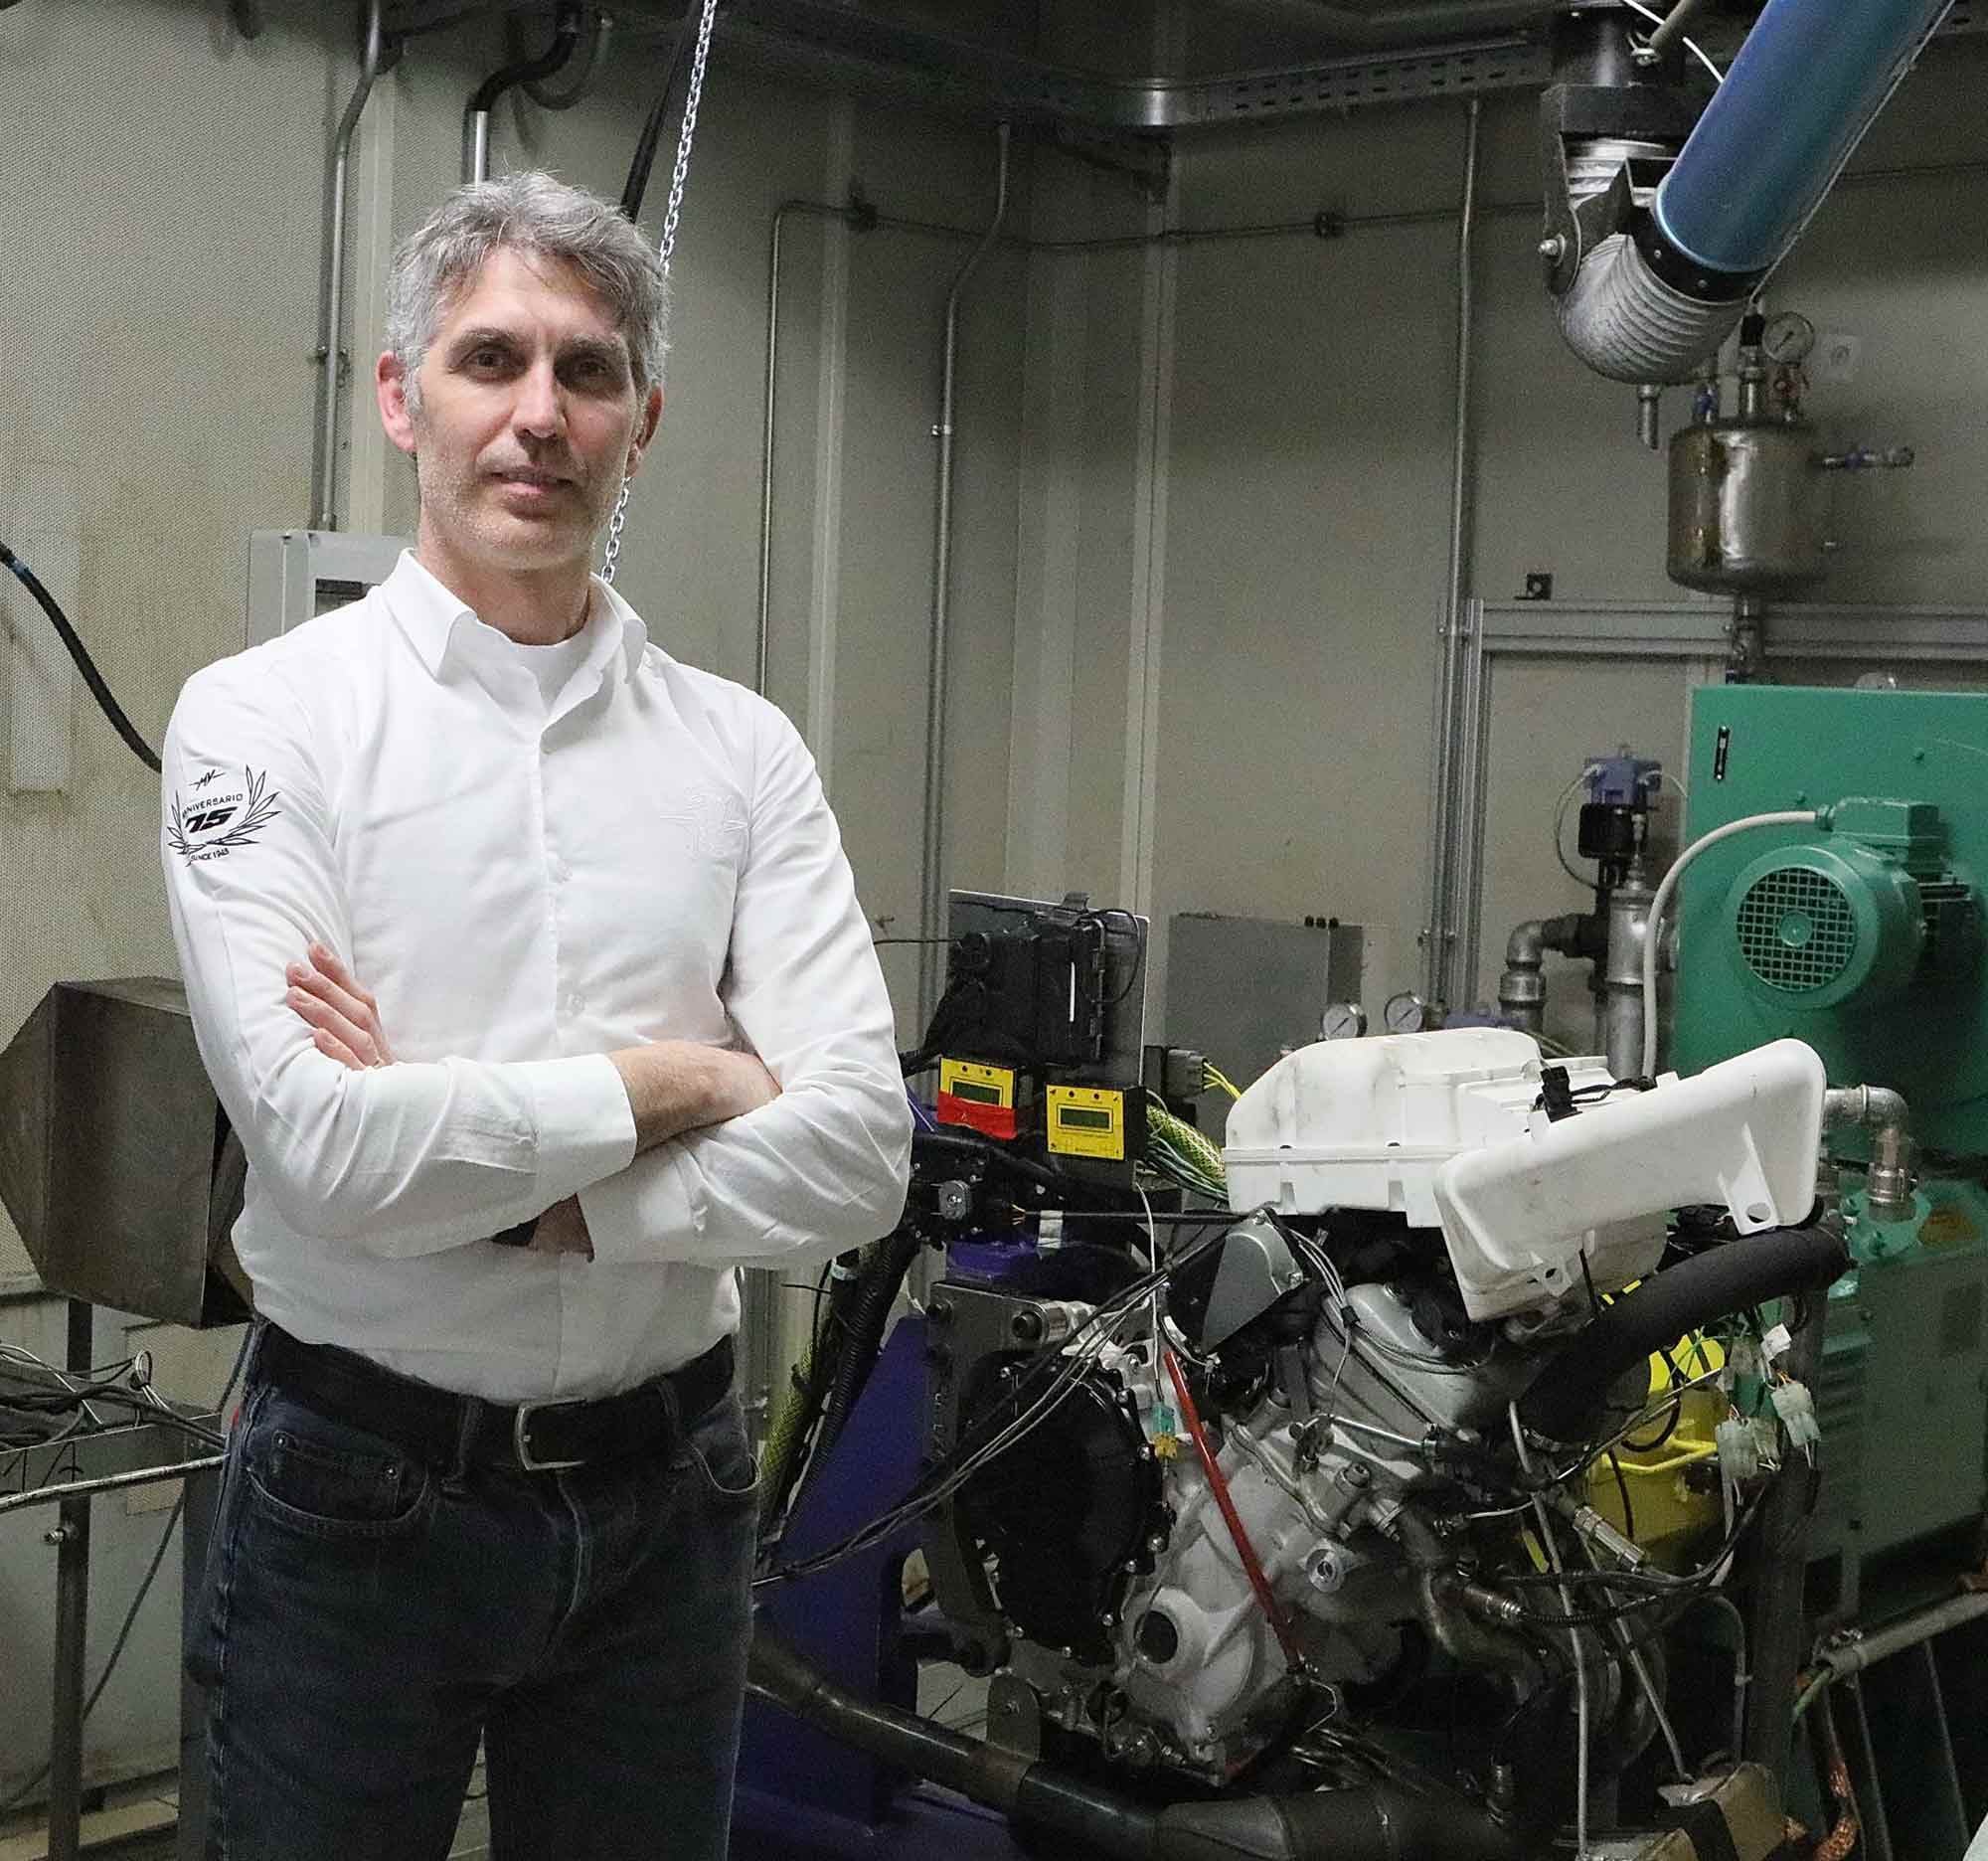 MV Agusta chief project engineer Dr. Brian Gillen standing next to his latest creation in the dyno room for its final power and homologation runs. The 950 features three catalytic converters and will be certified as Euro 5 compliant.